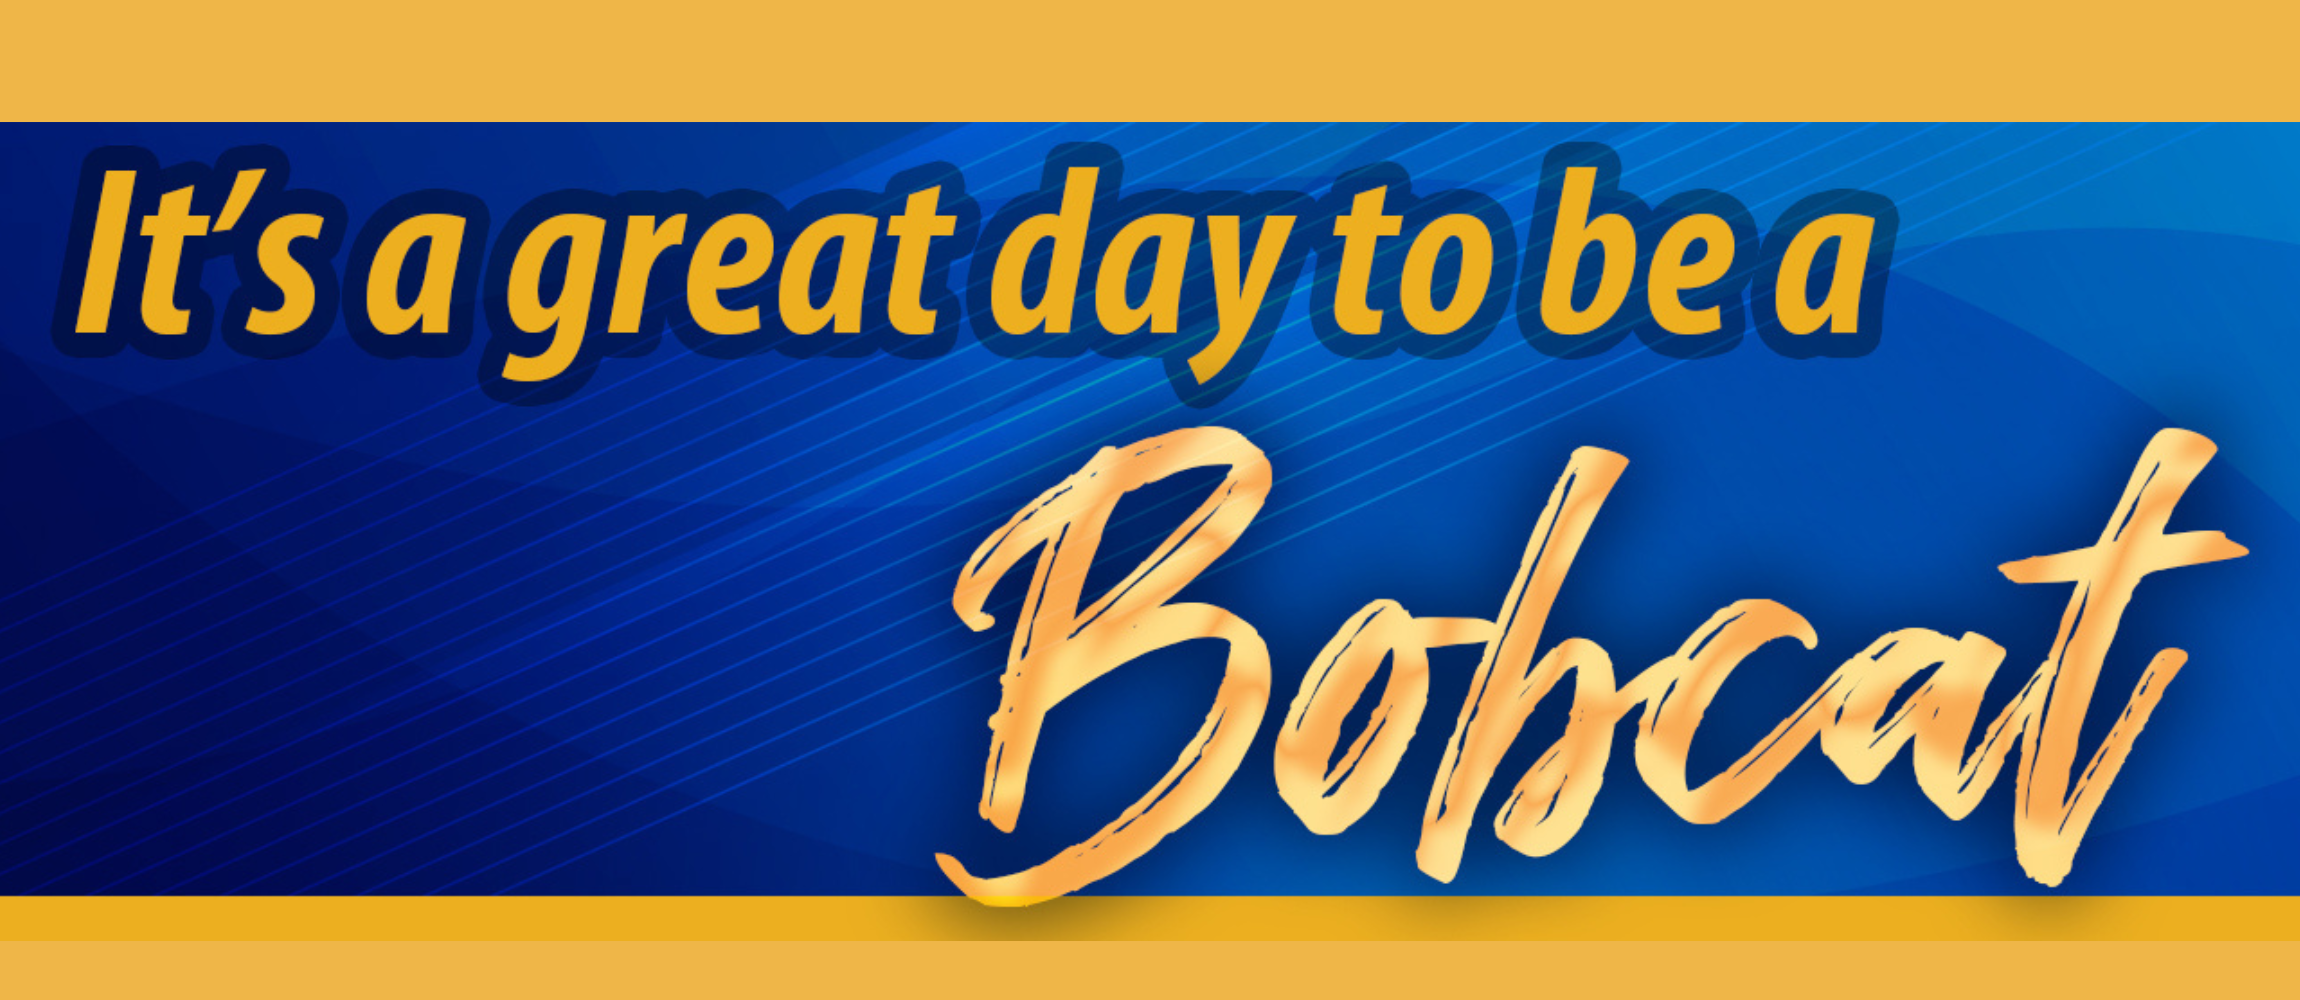 It's a great day to be a bobcat!